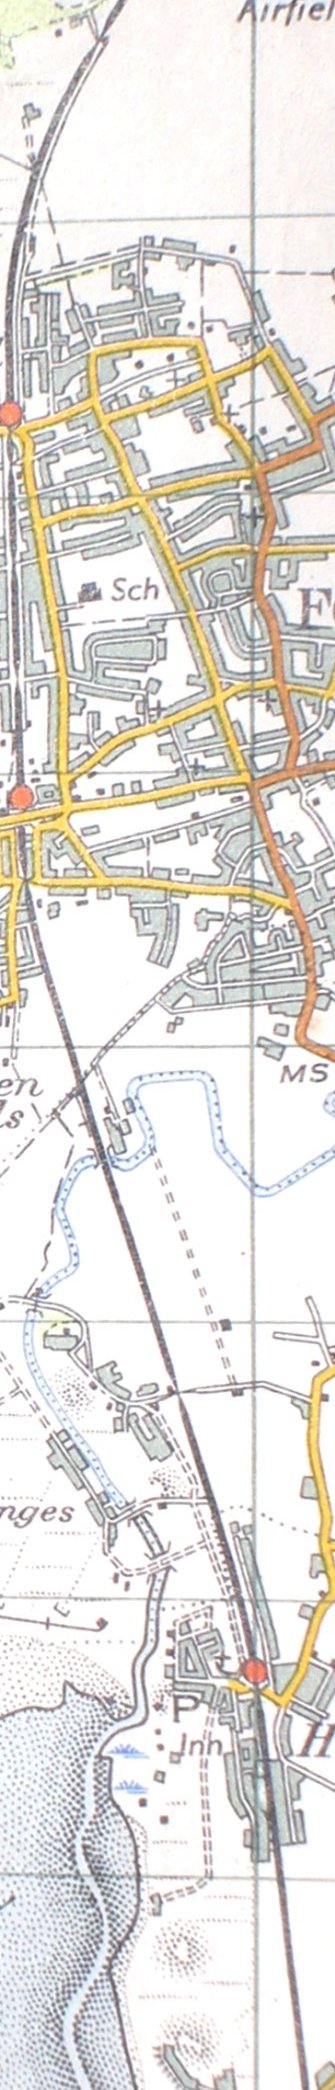 A section from the 1961 Ordnance Survey Map showing the Liverpool - Southport line of the Lancashire & Yorkshire Railway between Freshfield and Hightown.